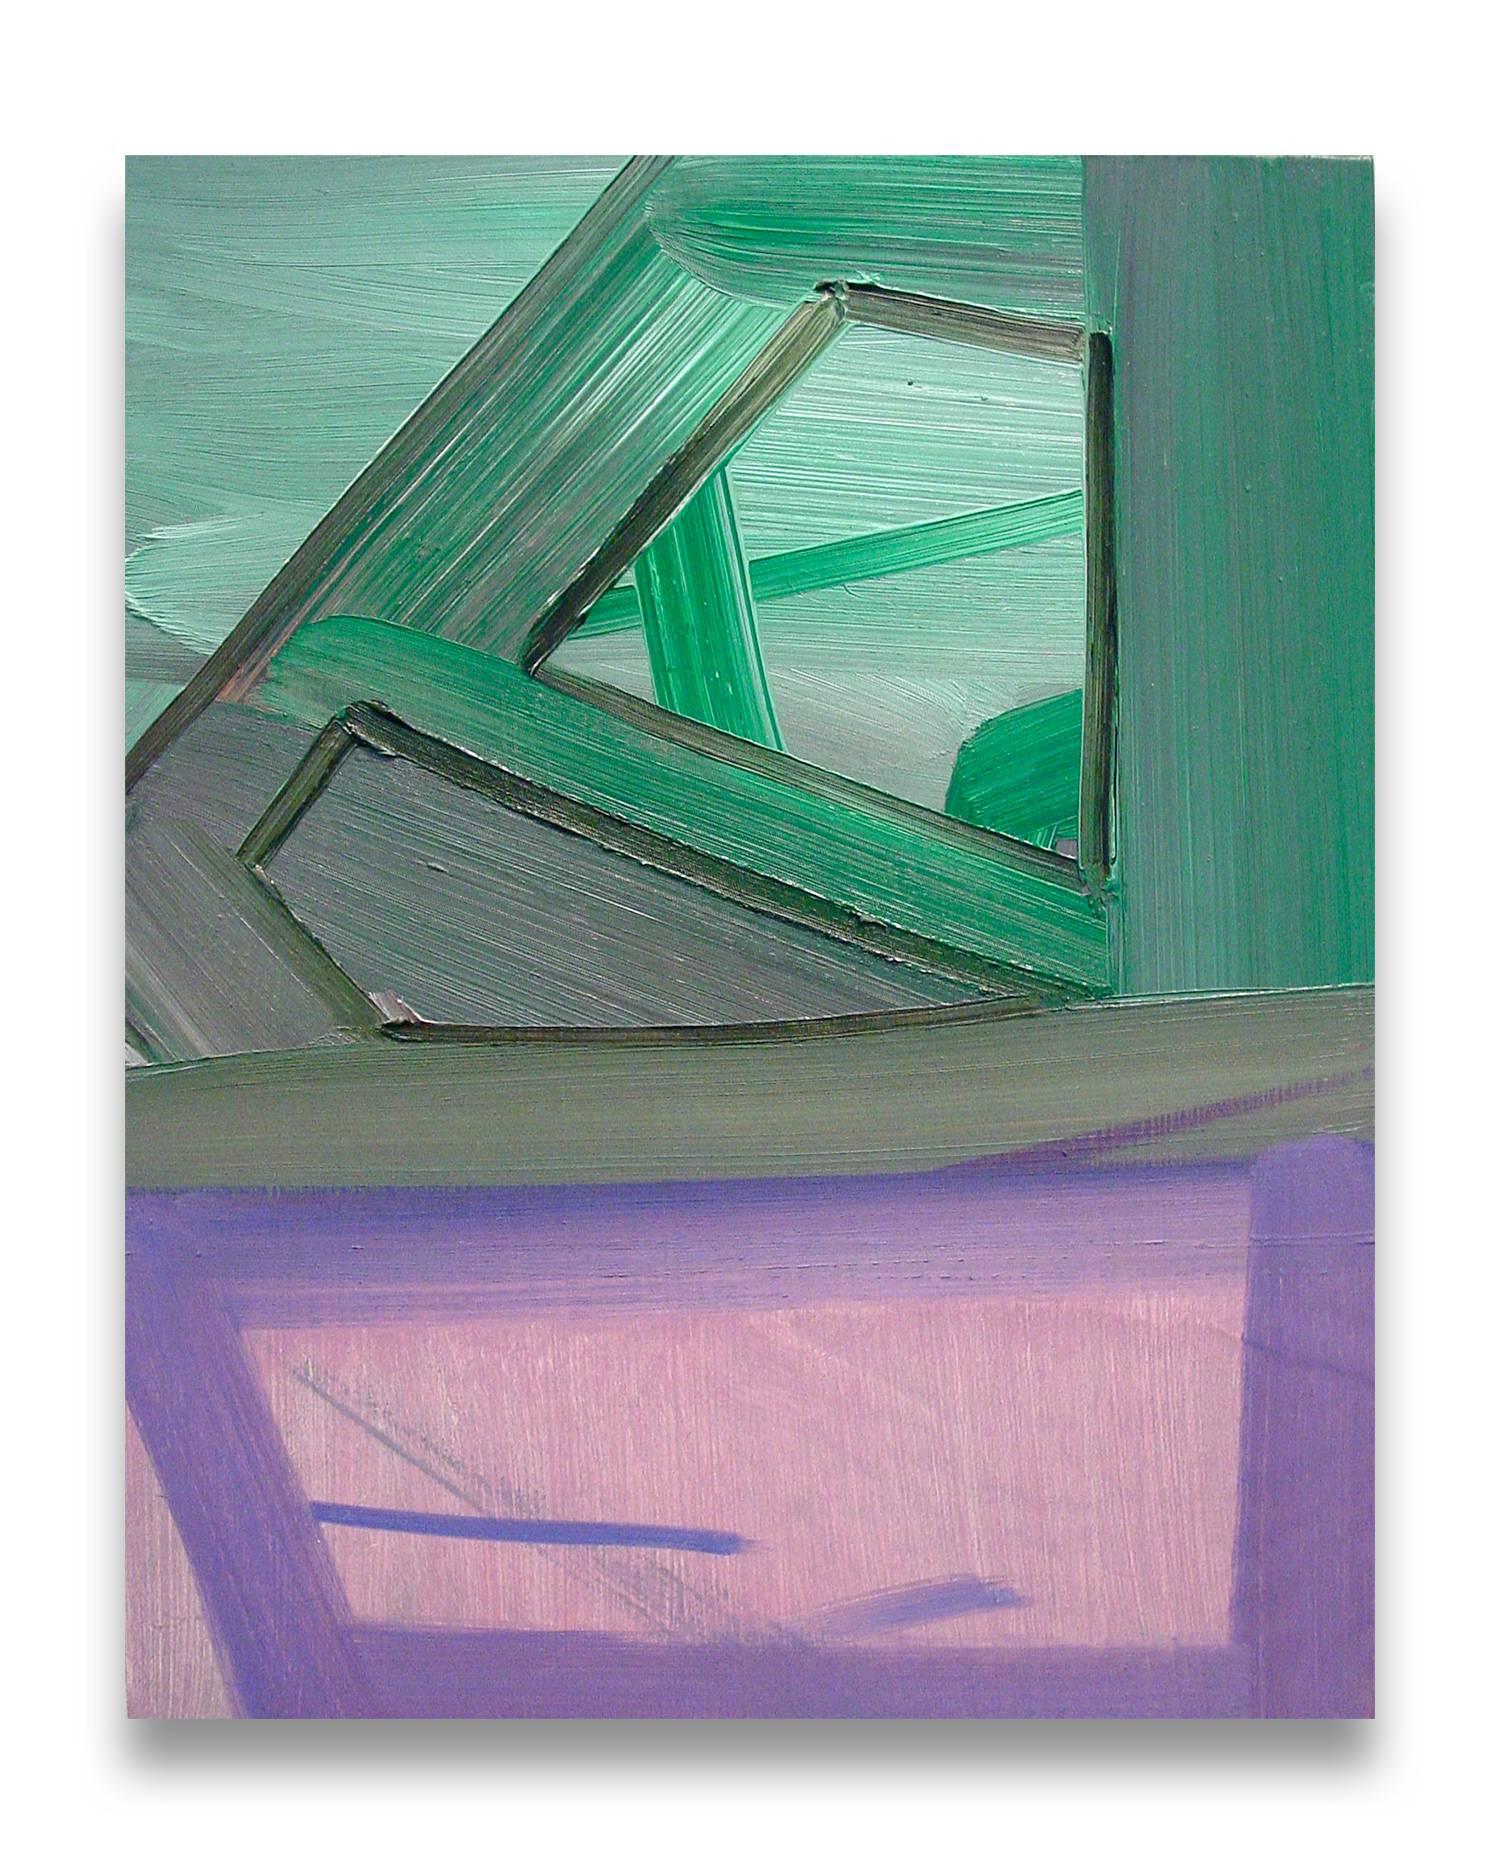 Purple Lush (Abstract Painting)

Oil on panel - Unframed

Ashlynn Browning's recurring use of grids, networks may recall architectural structures, but these are only created in response to the paint as she works, instinctively.

Colors, which play a